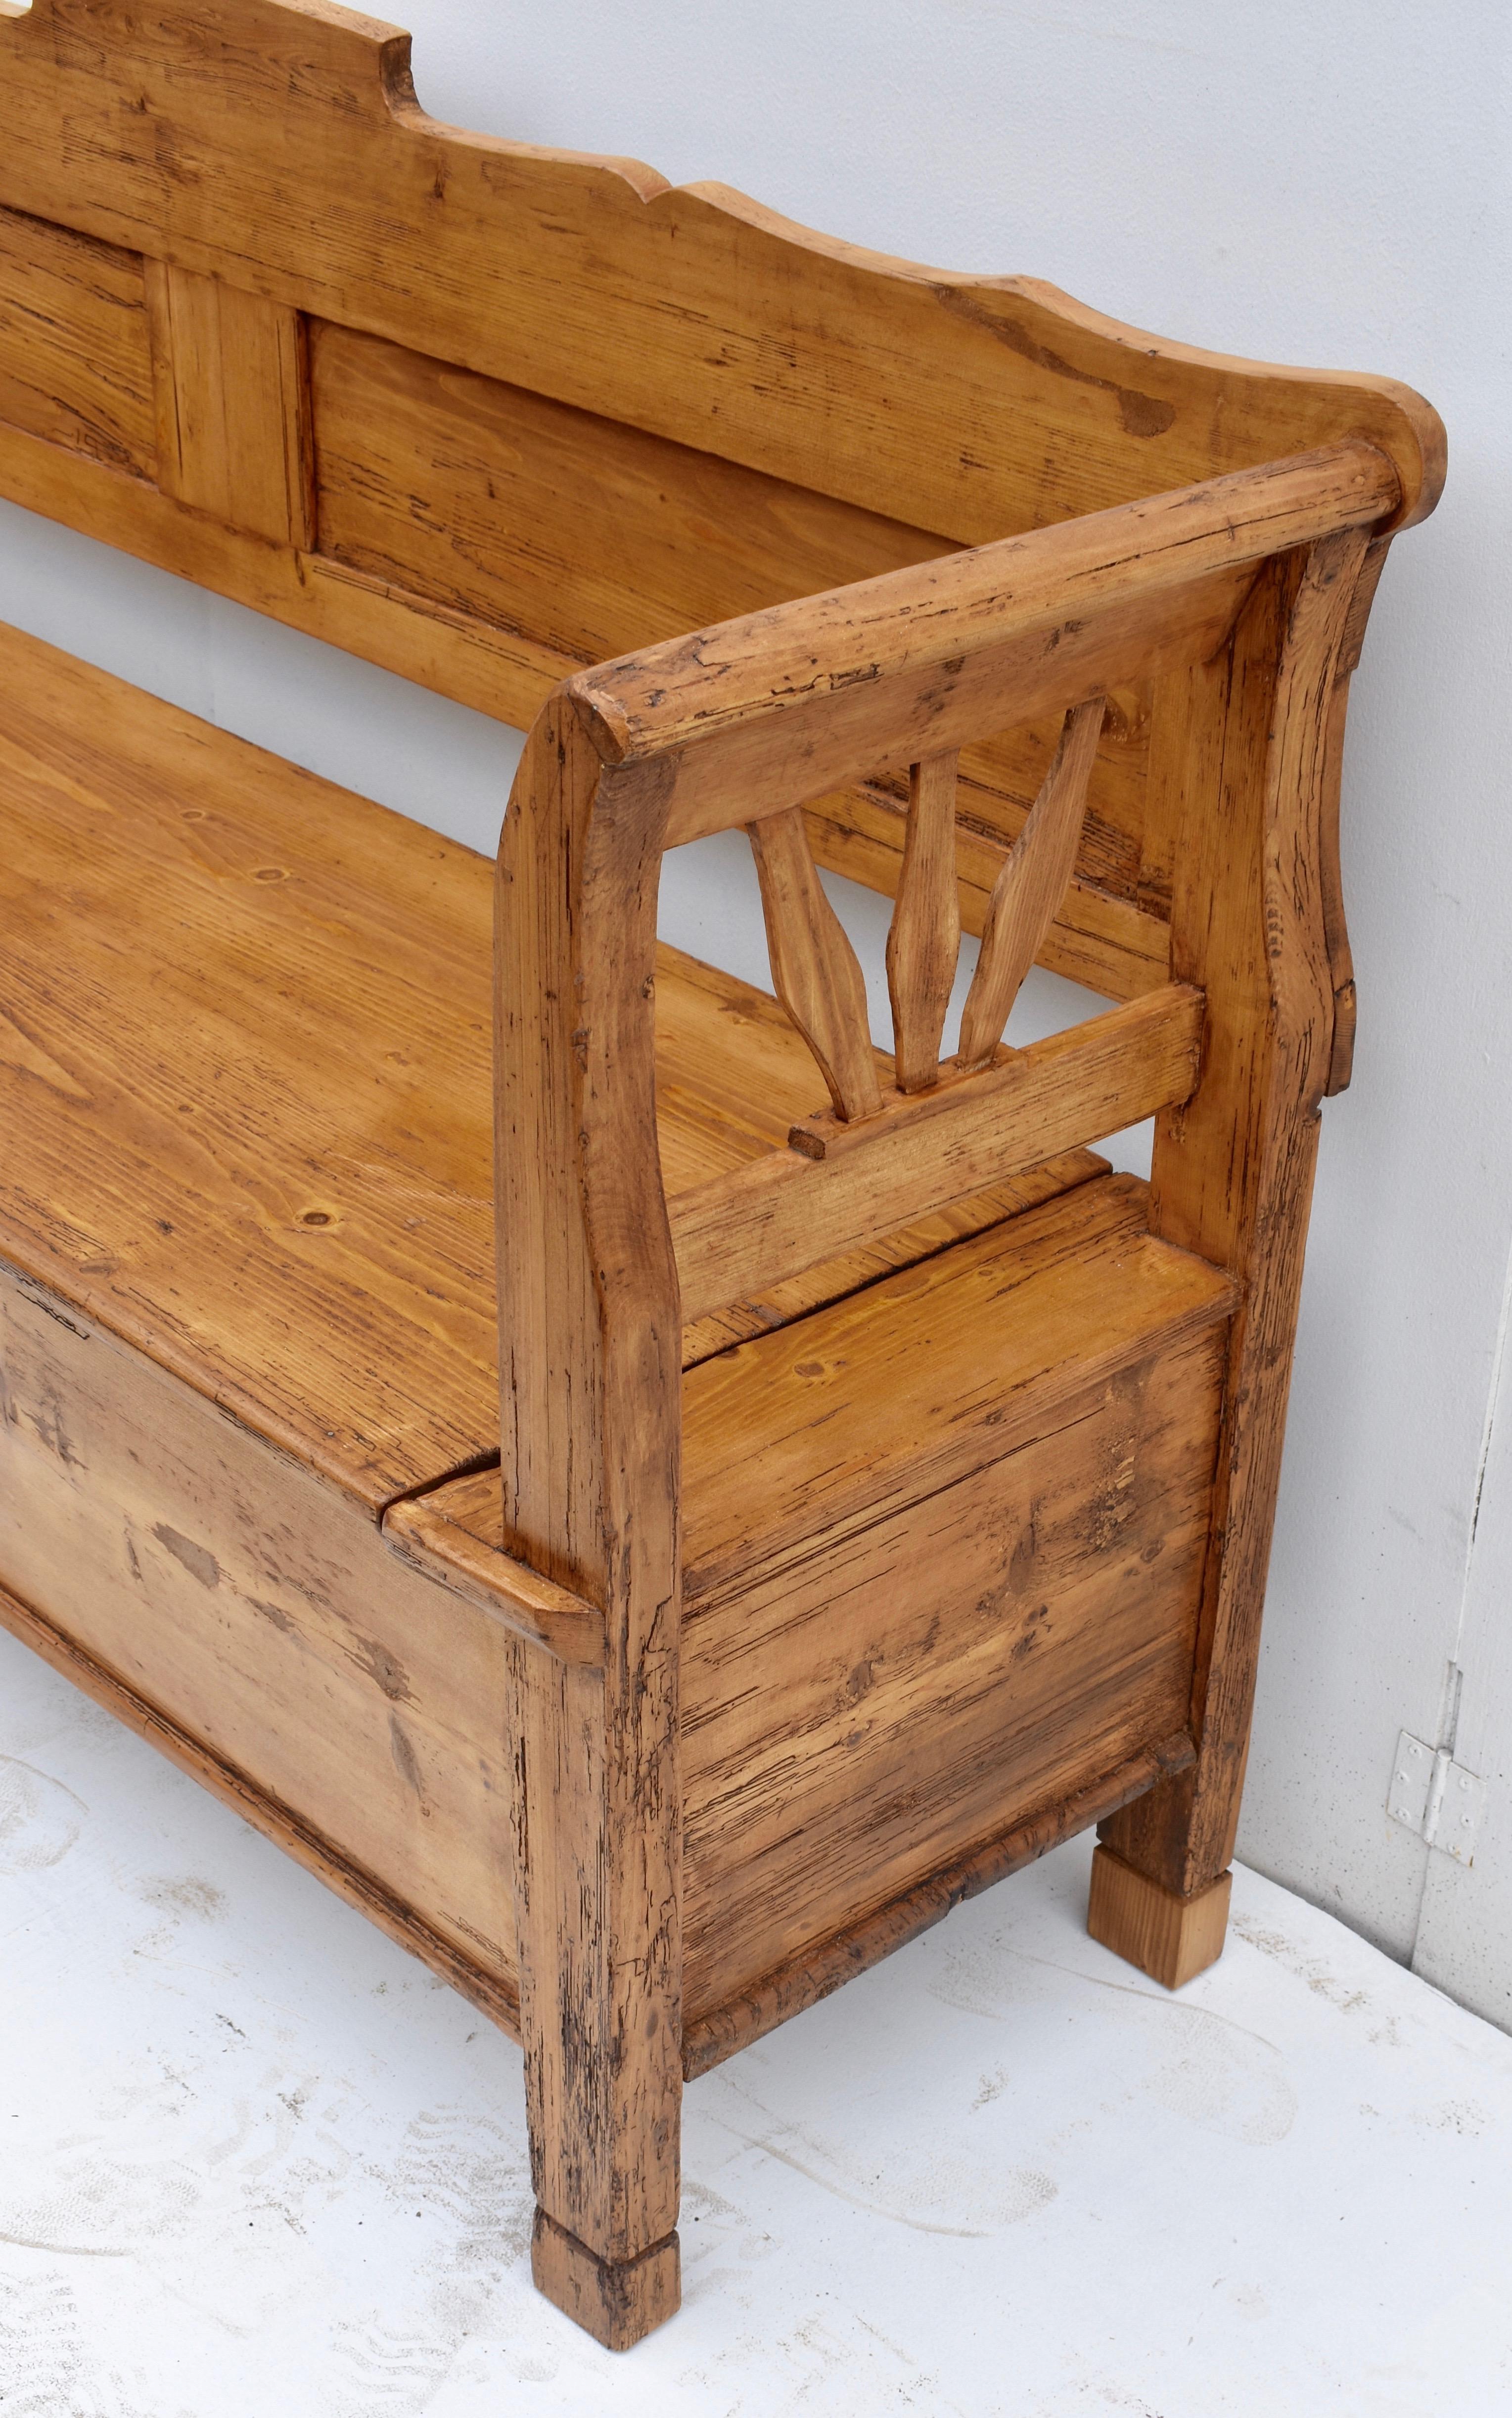 19th Century Pine and Oak Box Bench or Settle